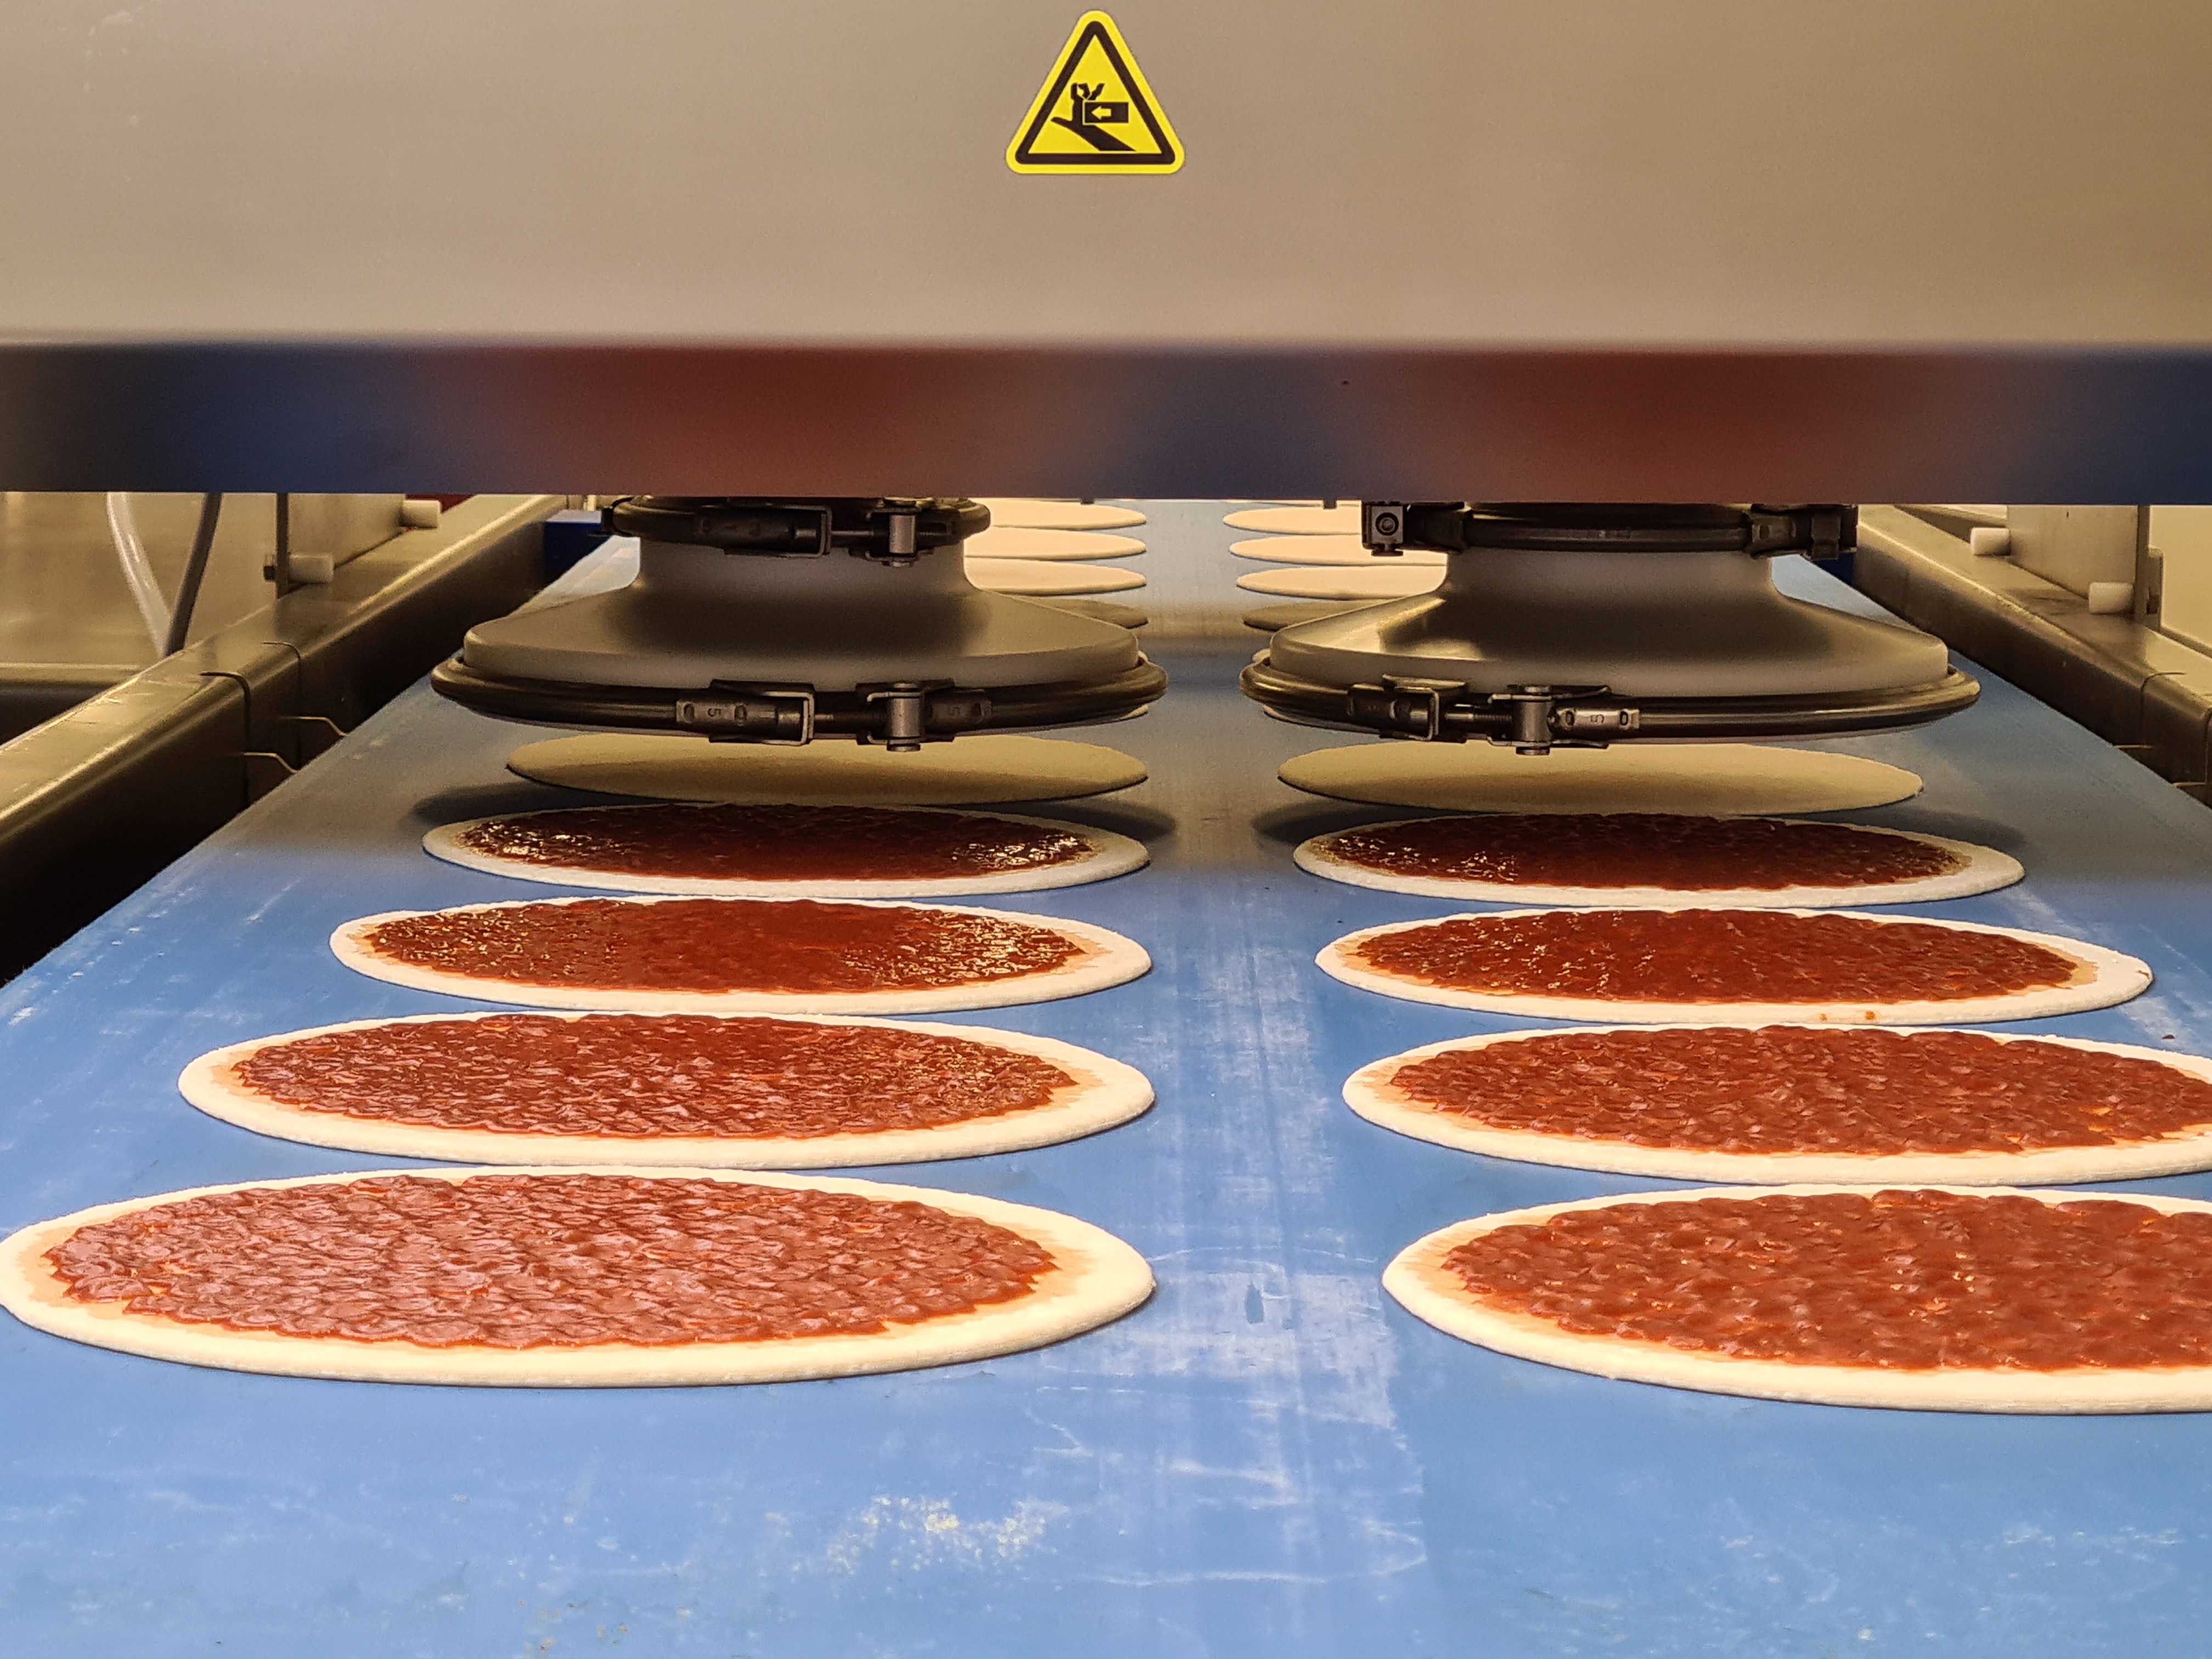 Automated Technologies for Pizza Production 703